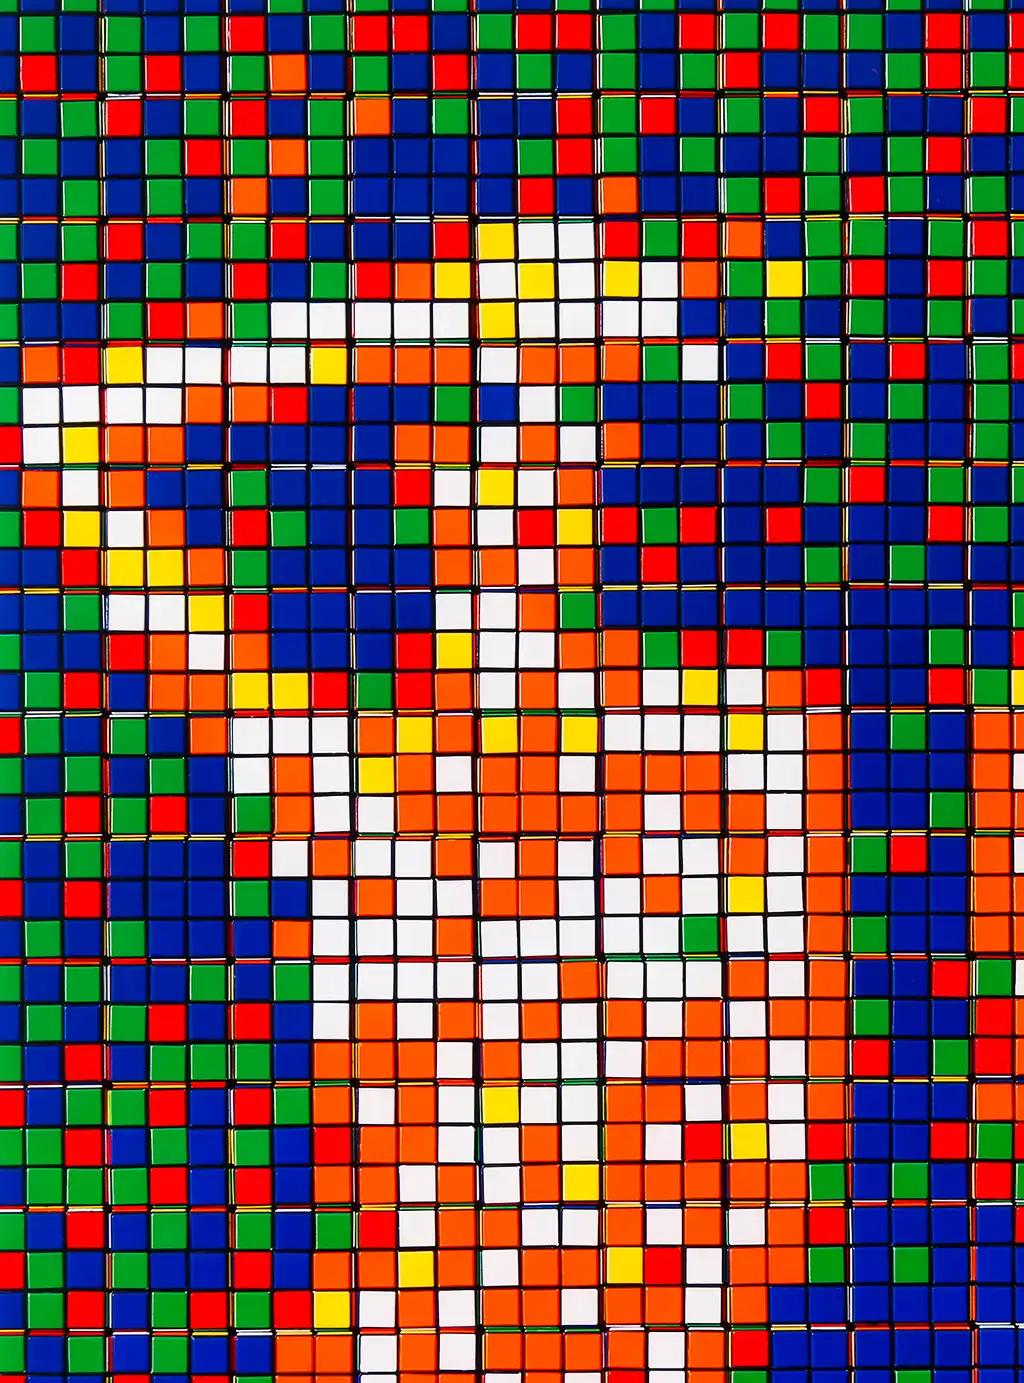 INVADER - RUBIK COUNTRY LIFE Rubikcubism Pop Art Mosaic Street Art French - Red Figurative Print by Invader